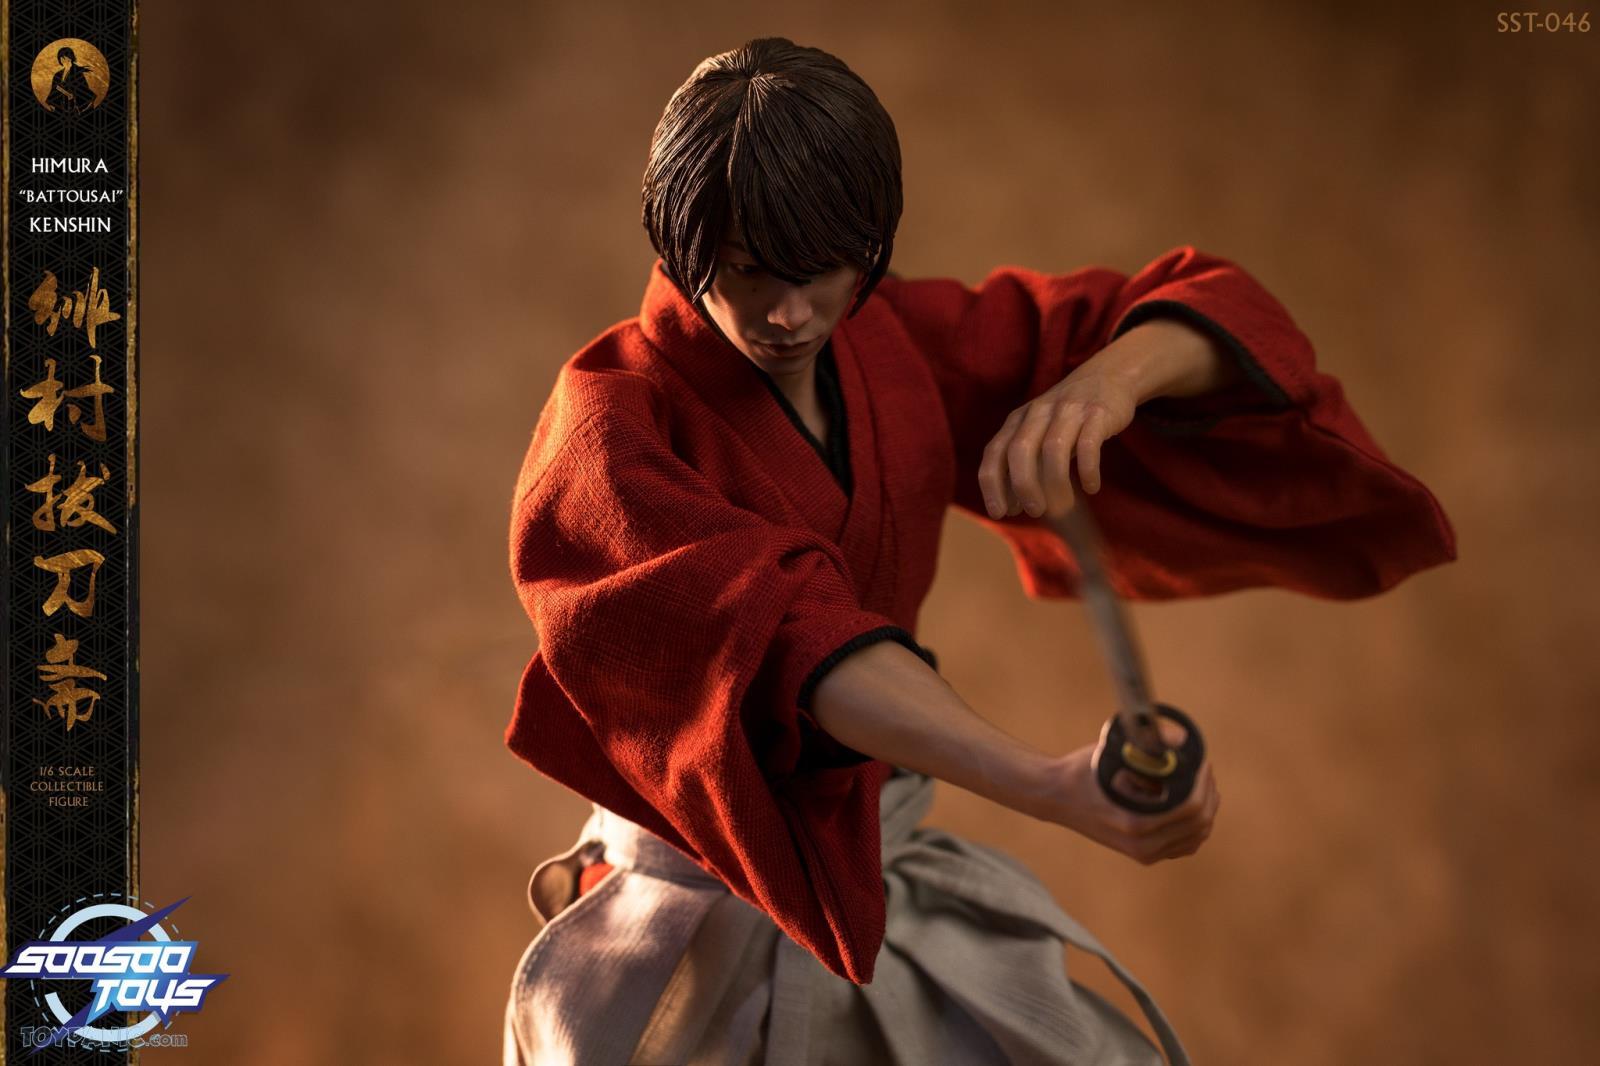 NEW PRODUCT: 1/6 scale Rurouni Kenshin Collectible Figure from SooSooToys 712202251230PM_8826835